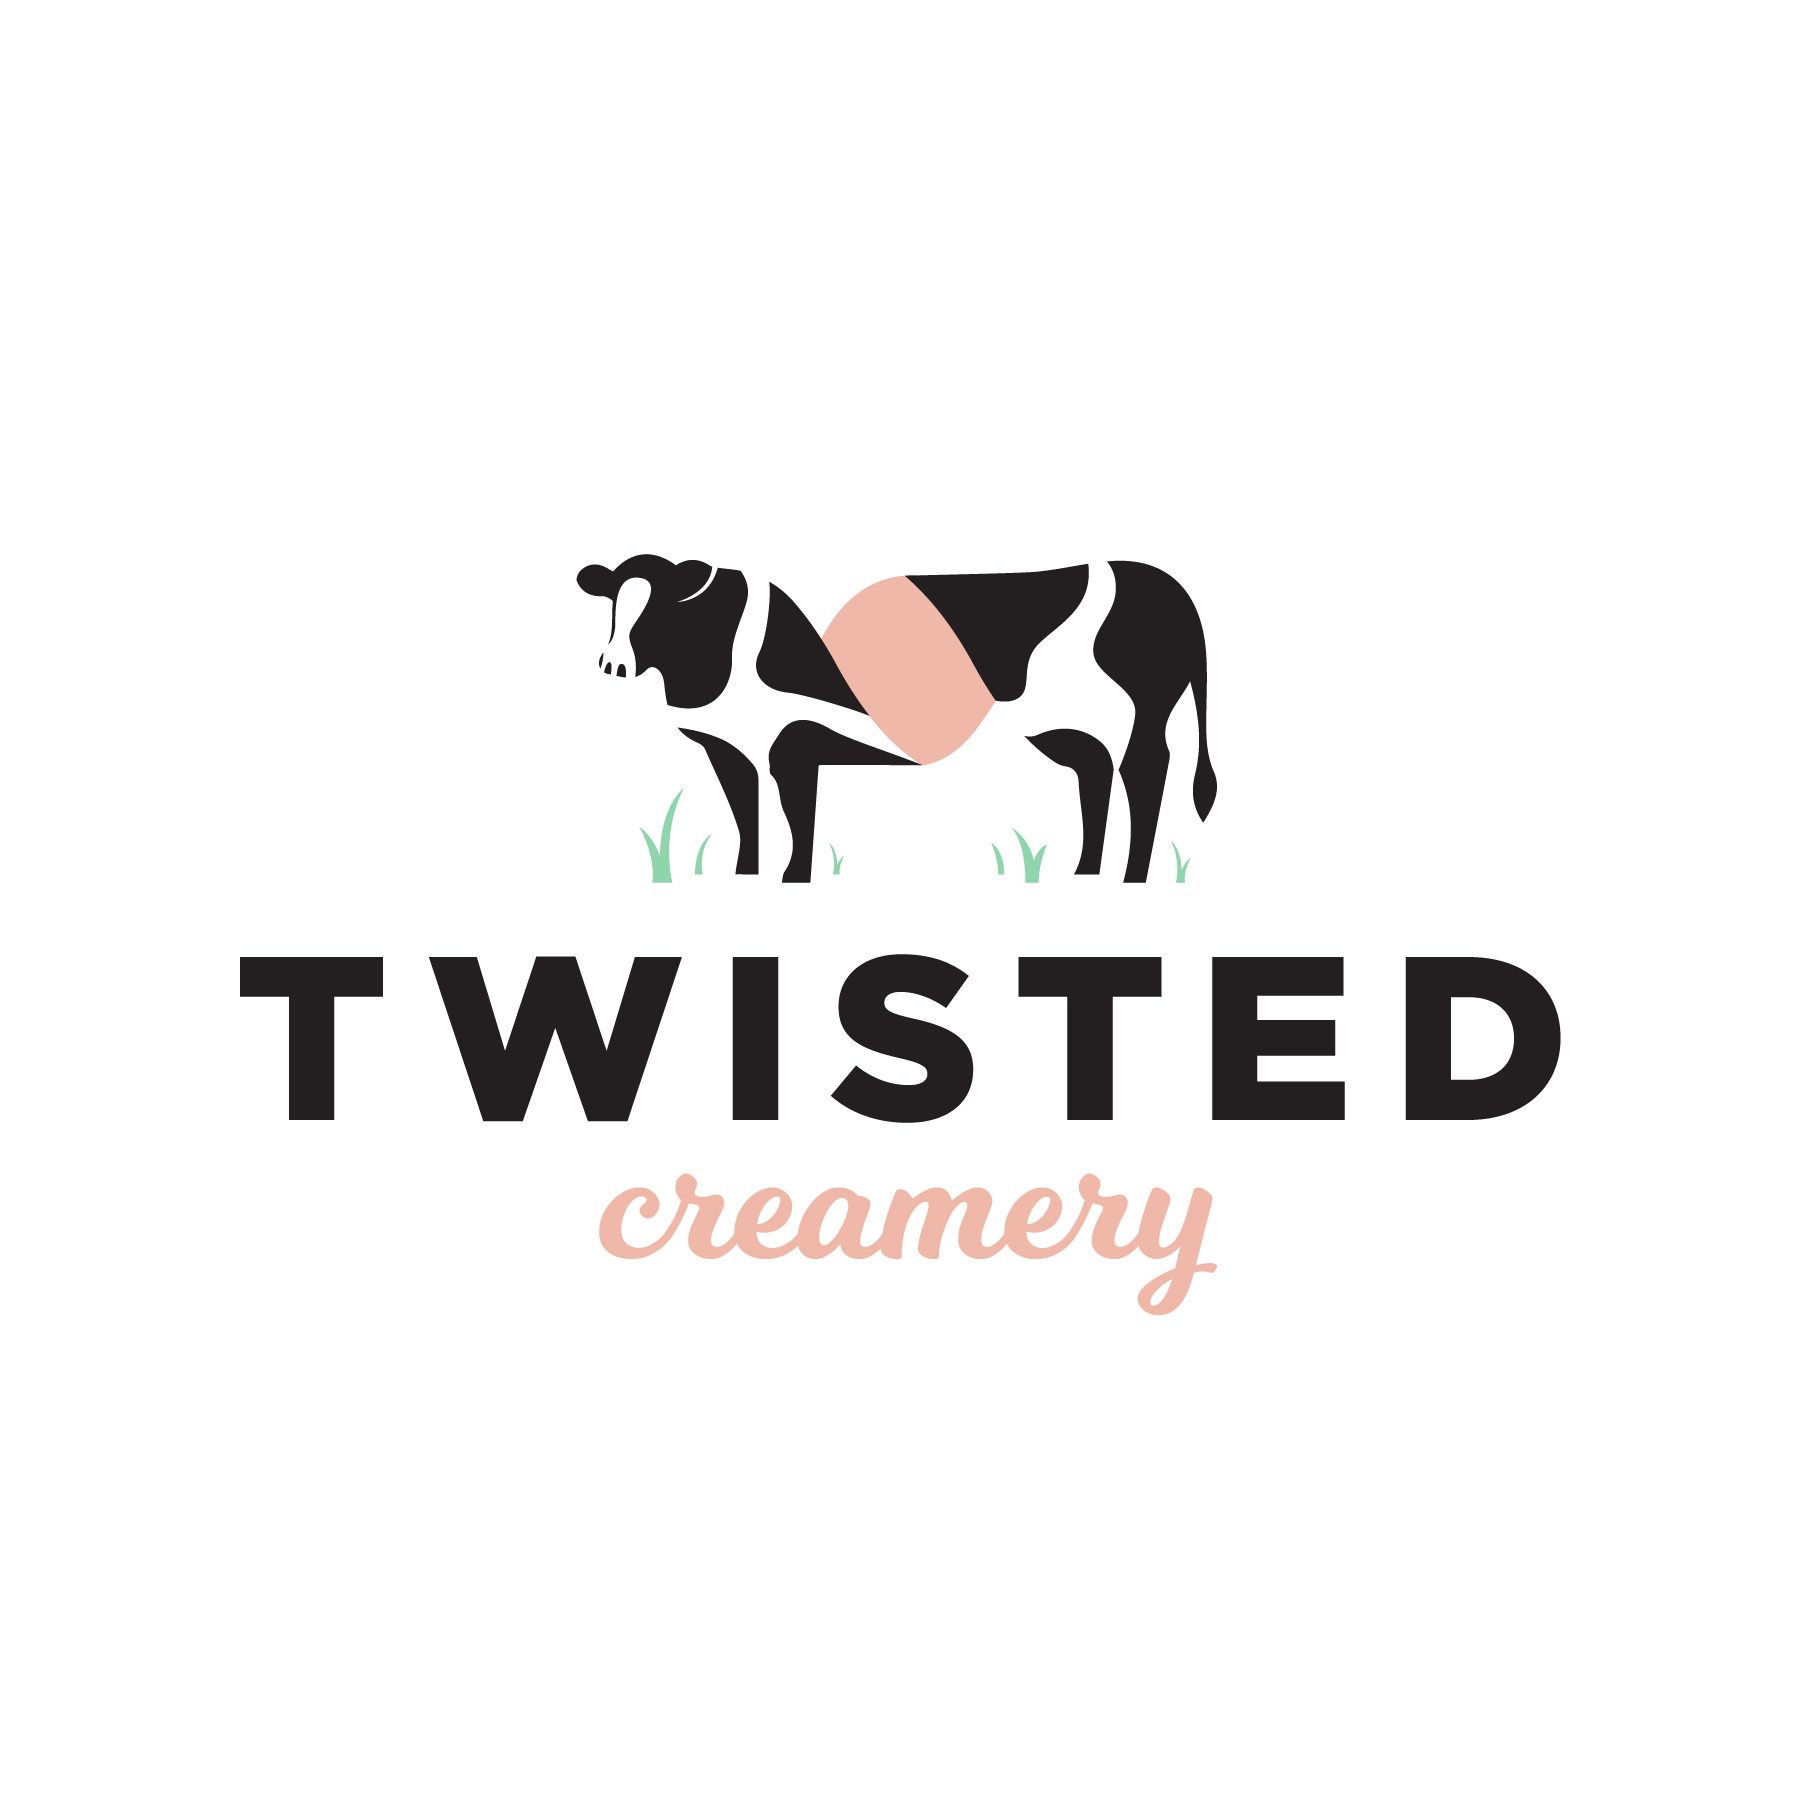 Twisted Creamery logo design by logo designer Kristin Gibson for your inspiration and for the worlds largest logo competition